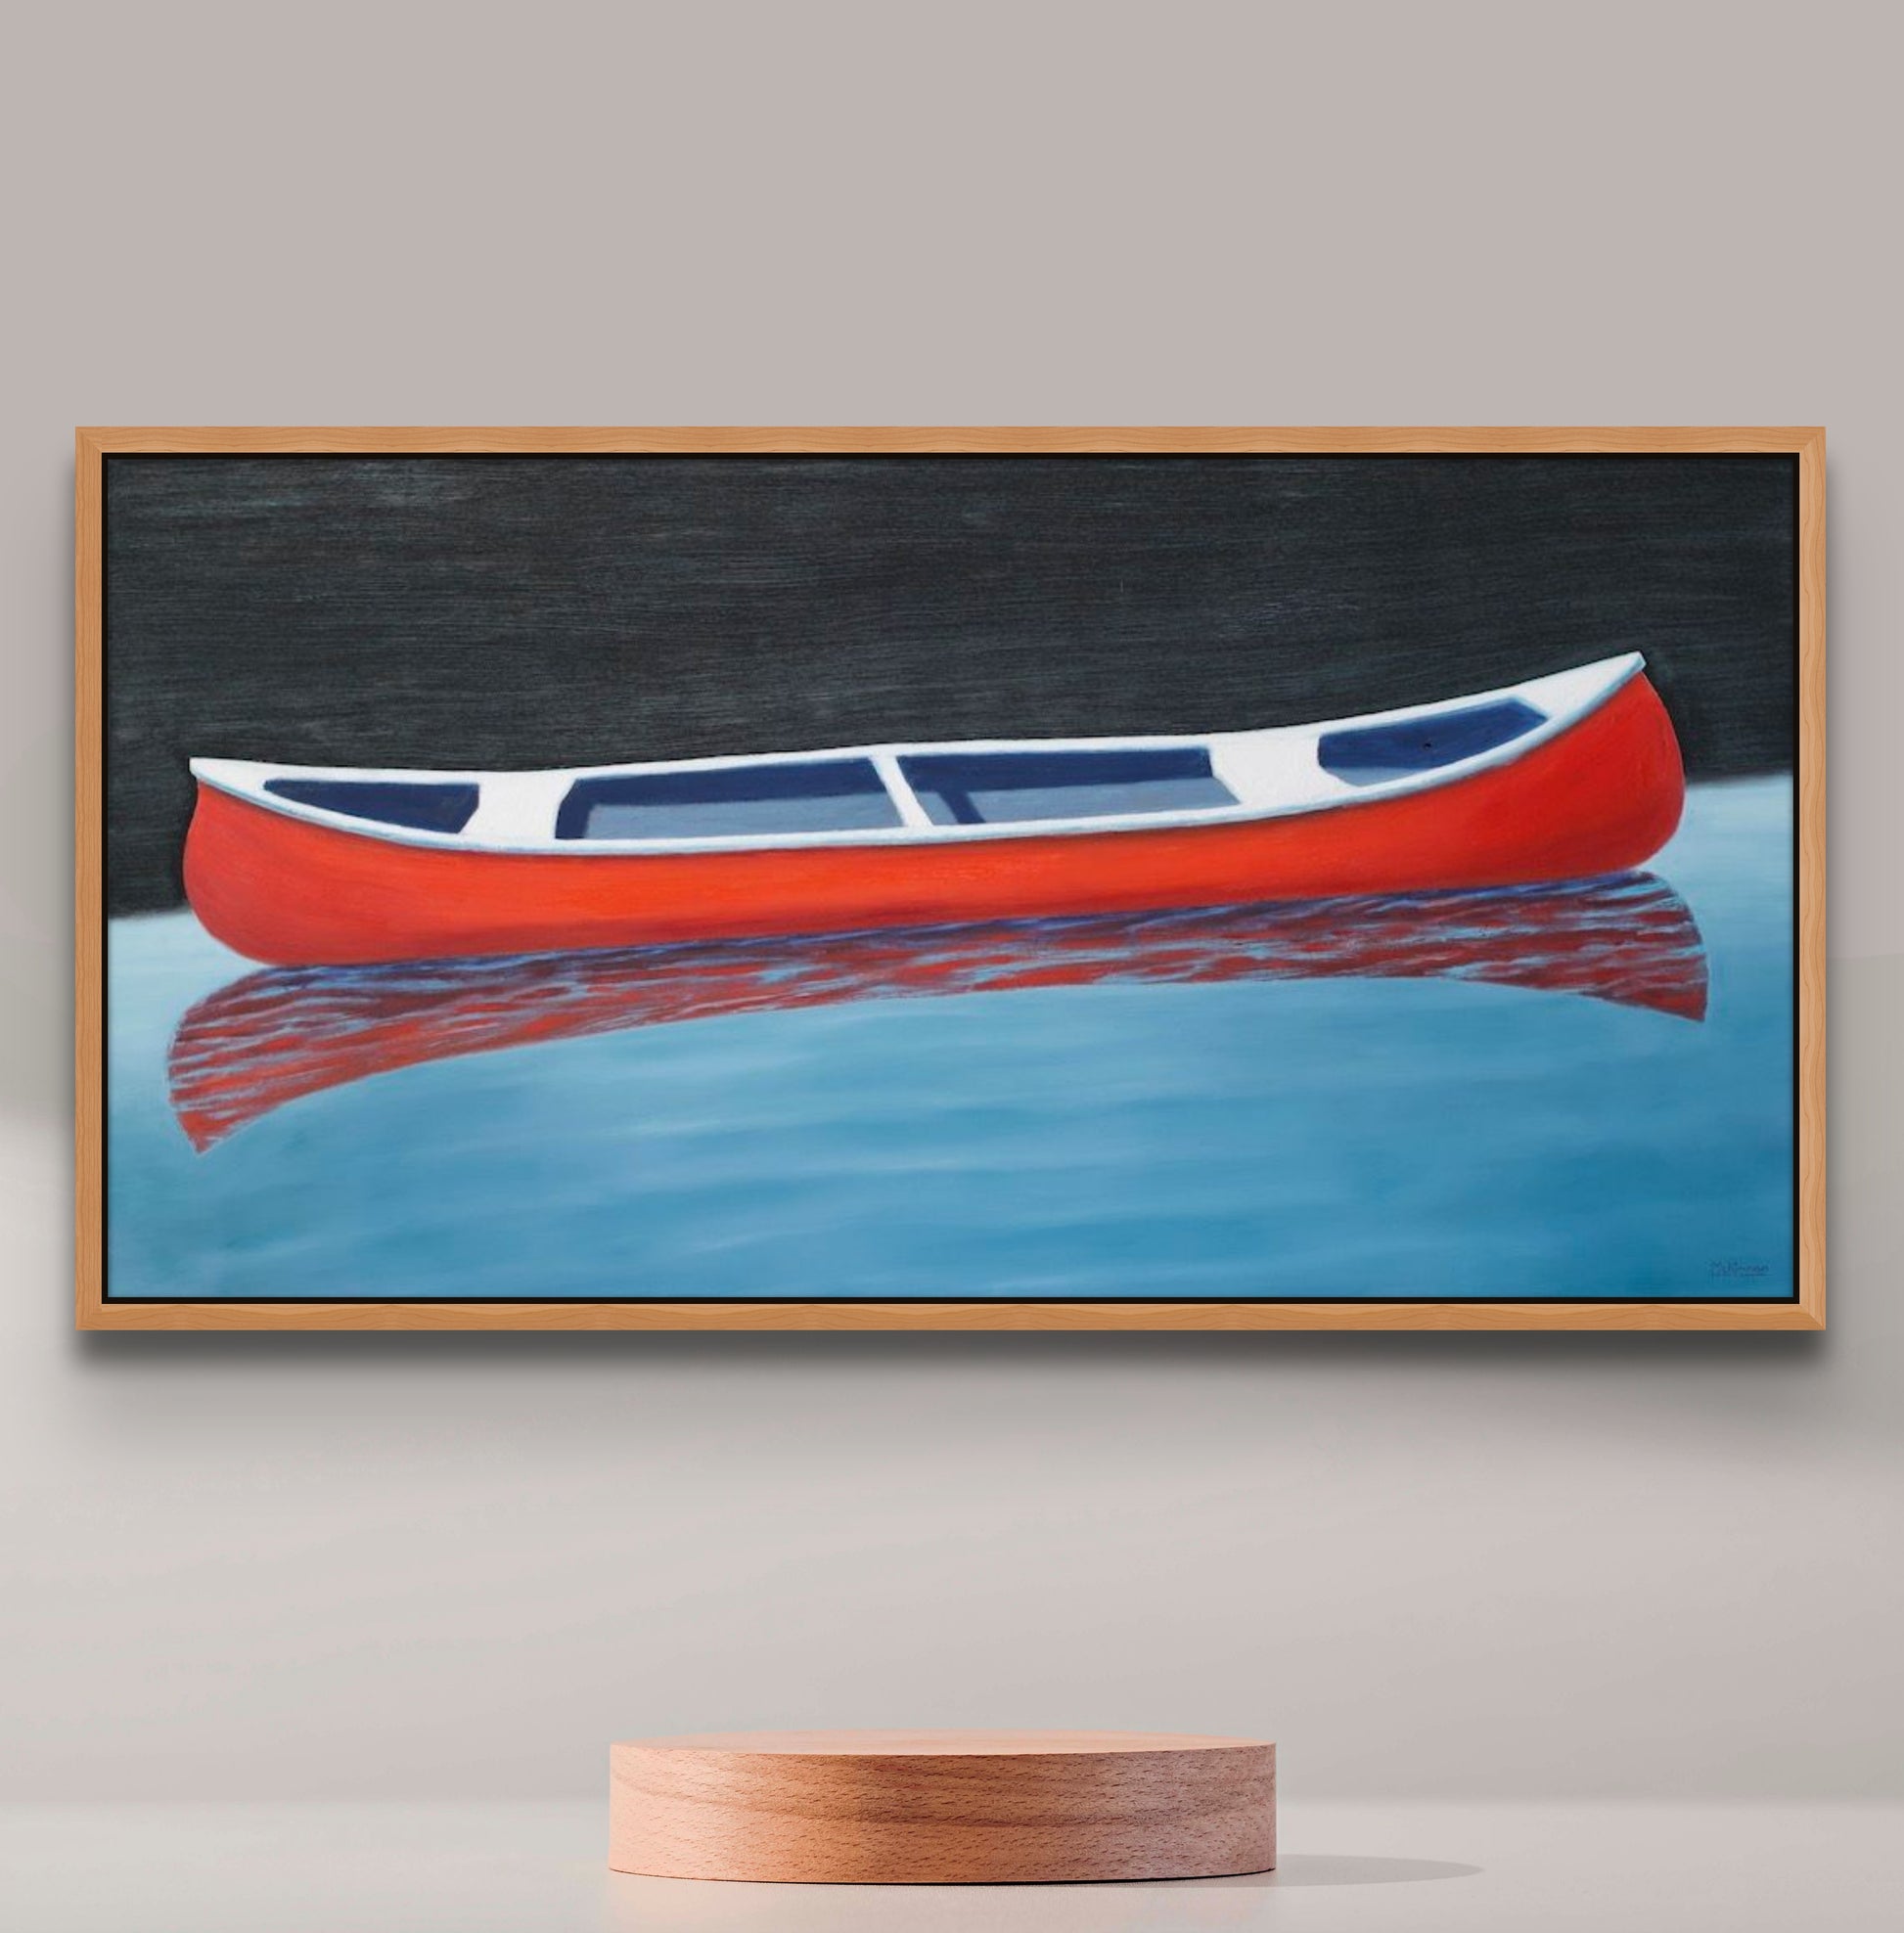 Canoe painting of a small red boat by Canadian artist Catherine McKinnon. The red canoe is floating on almost still blue water in the foreground and the background is pitch black. The giclee print is framed in cherry wood and is mounted on a medium gray wall.